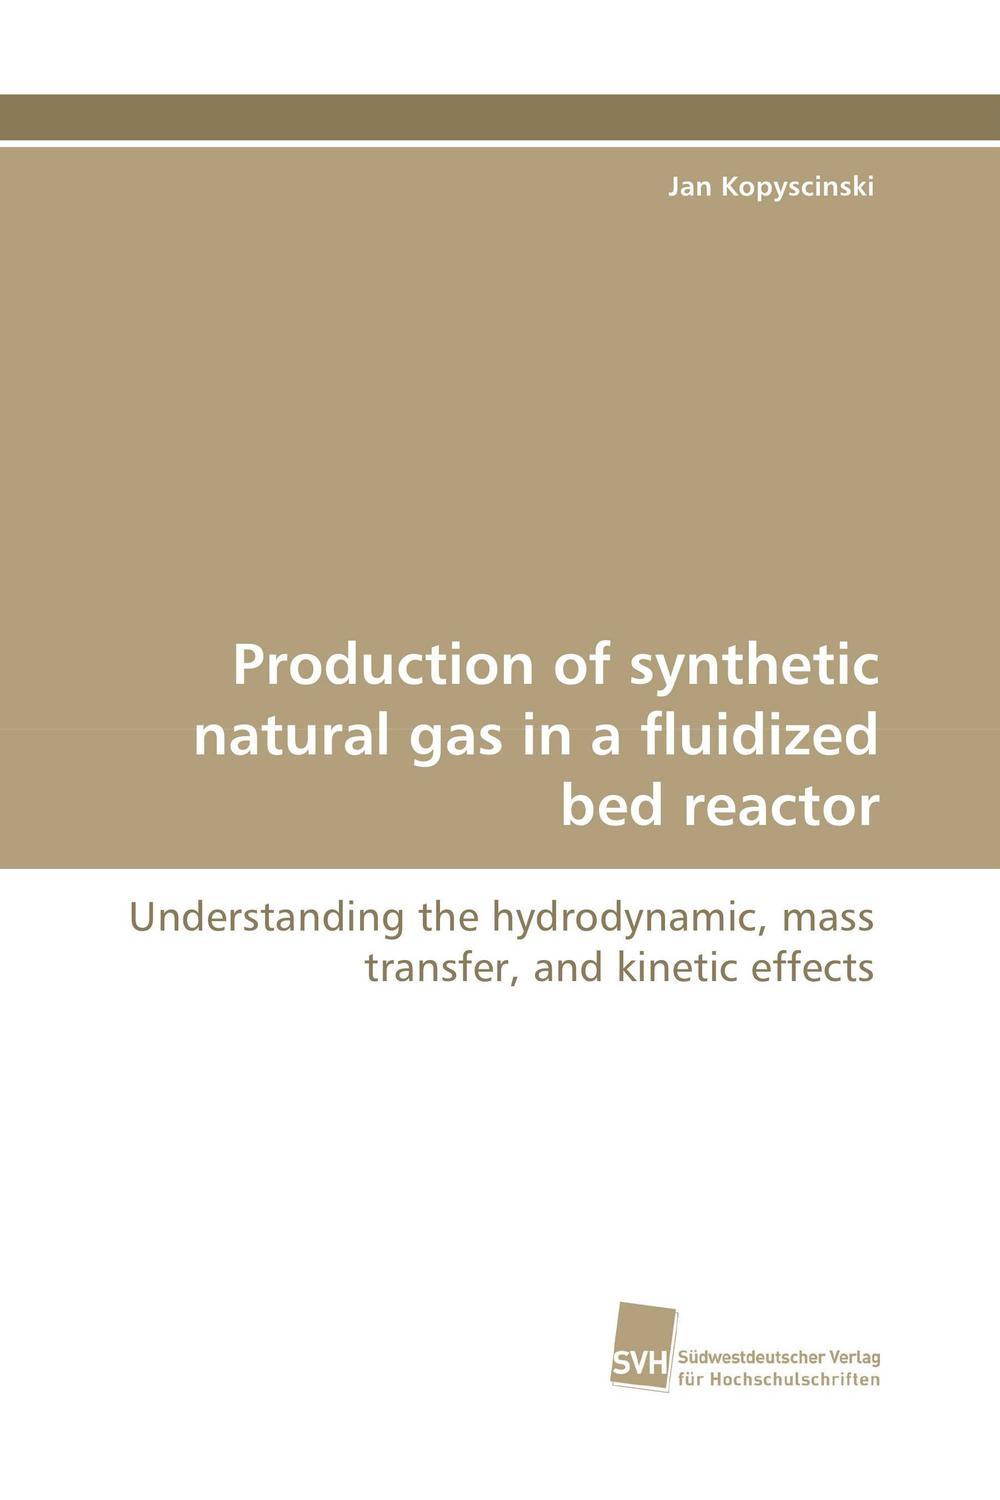 Production of synthetic natural gas in a fluidized bed reactor - Jan Kopyscinski